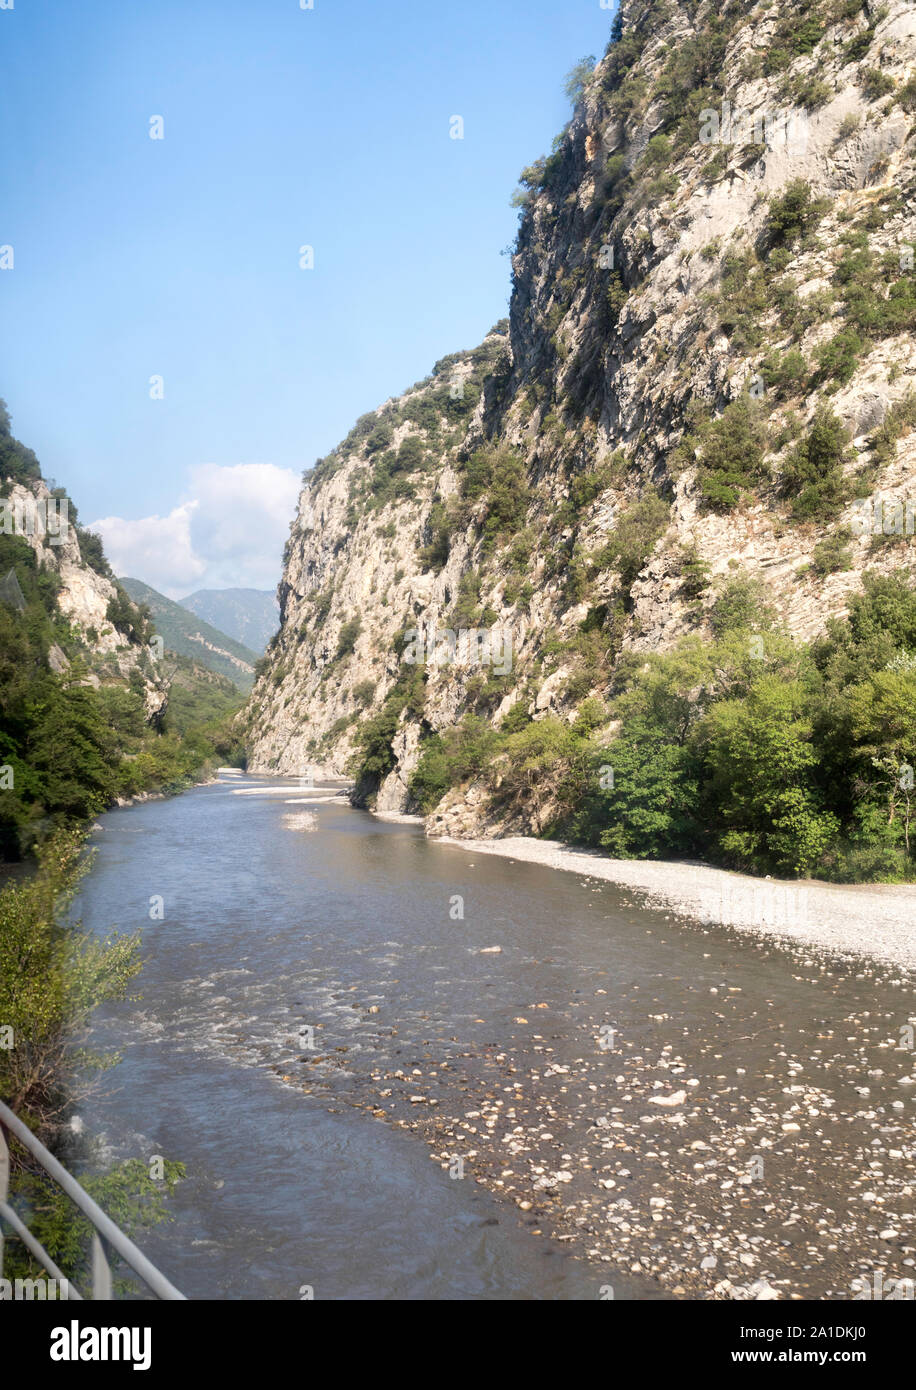 View of the river Var valley taken from a Chemins de Fer de Provence train between Nice and Puget-Théniers, France, Europe Stock Photo